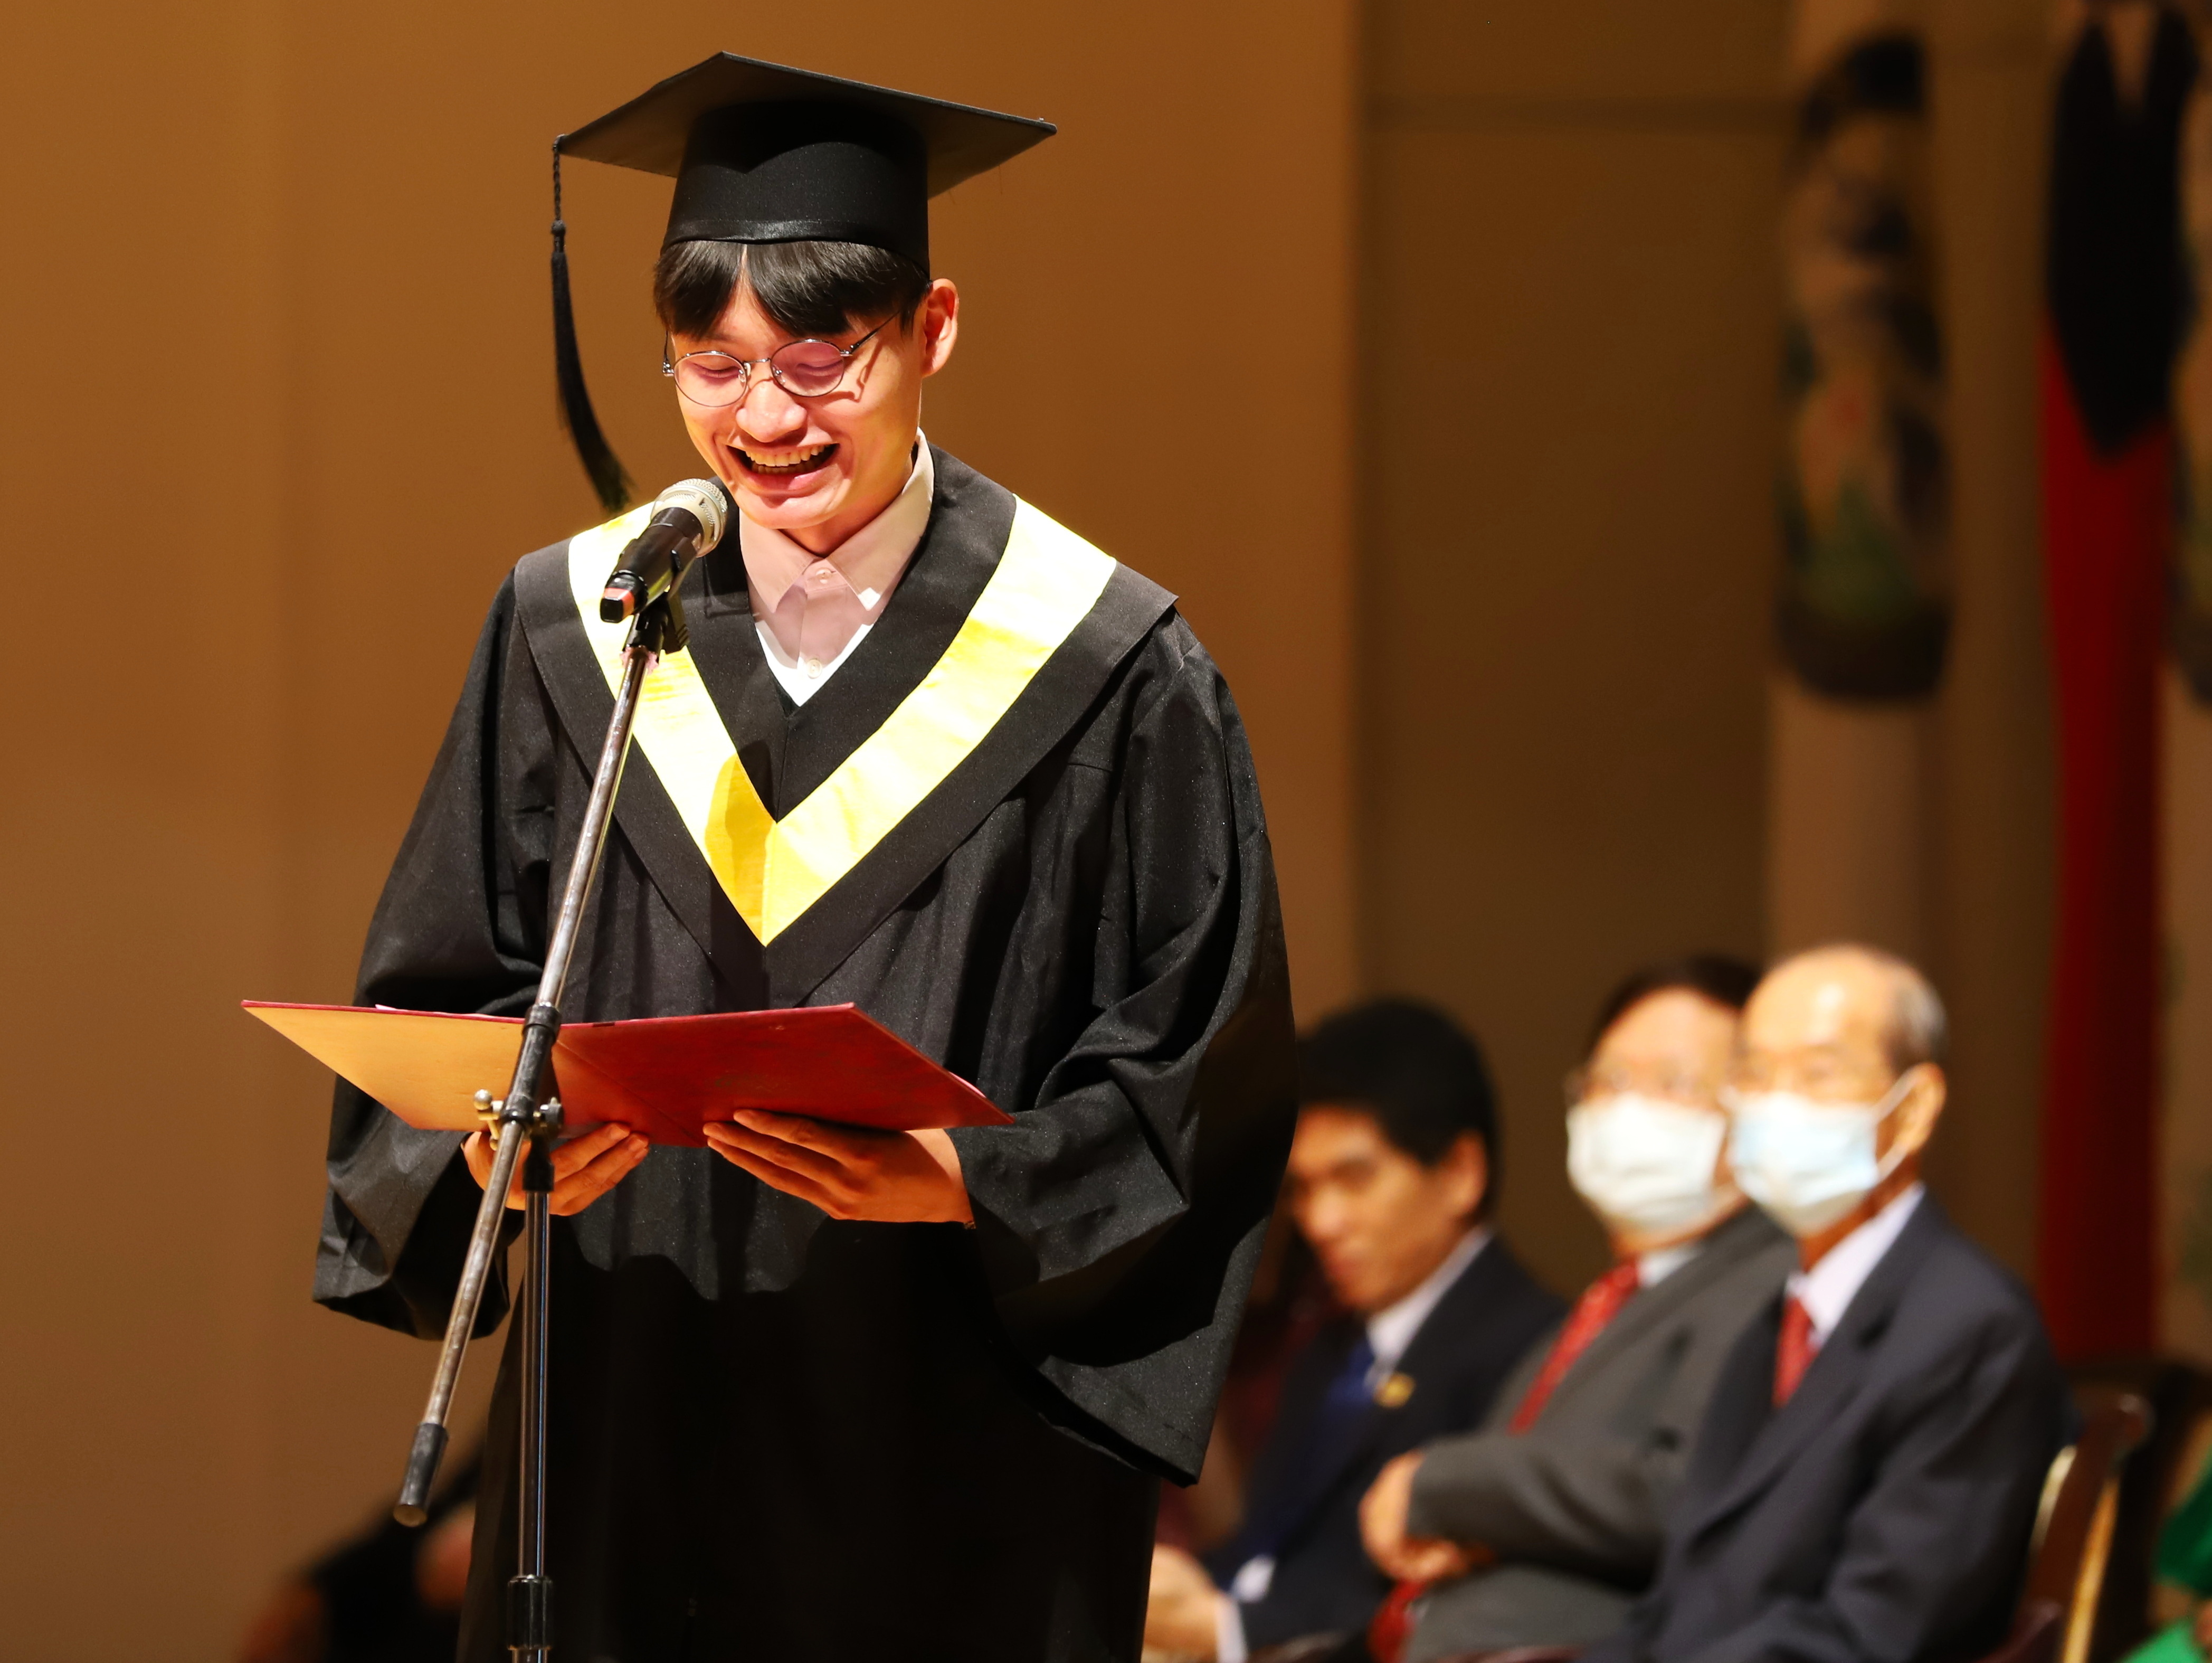 Lu Ming-Feng, a recent graduate from the Department of Animal Science, who had been honored with the 28th Outstanding Youth Award, delivered a graduation speech on behalf of the graduating students. 